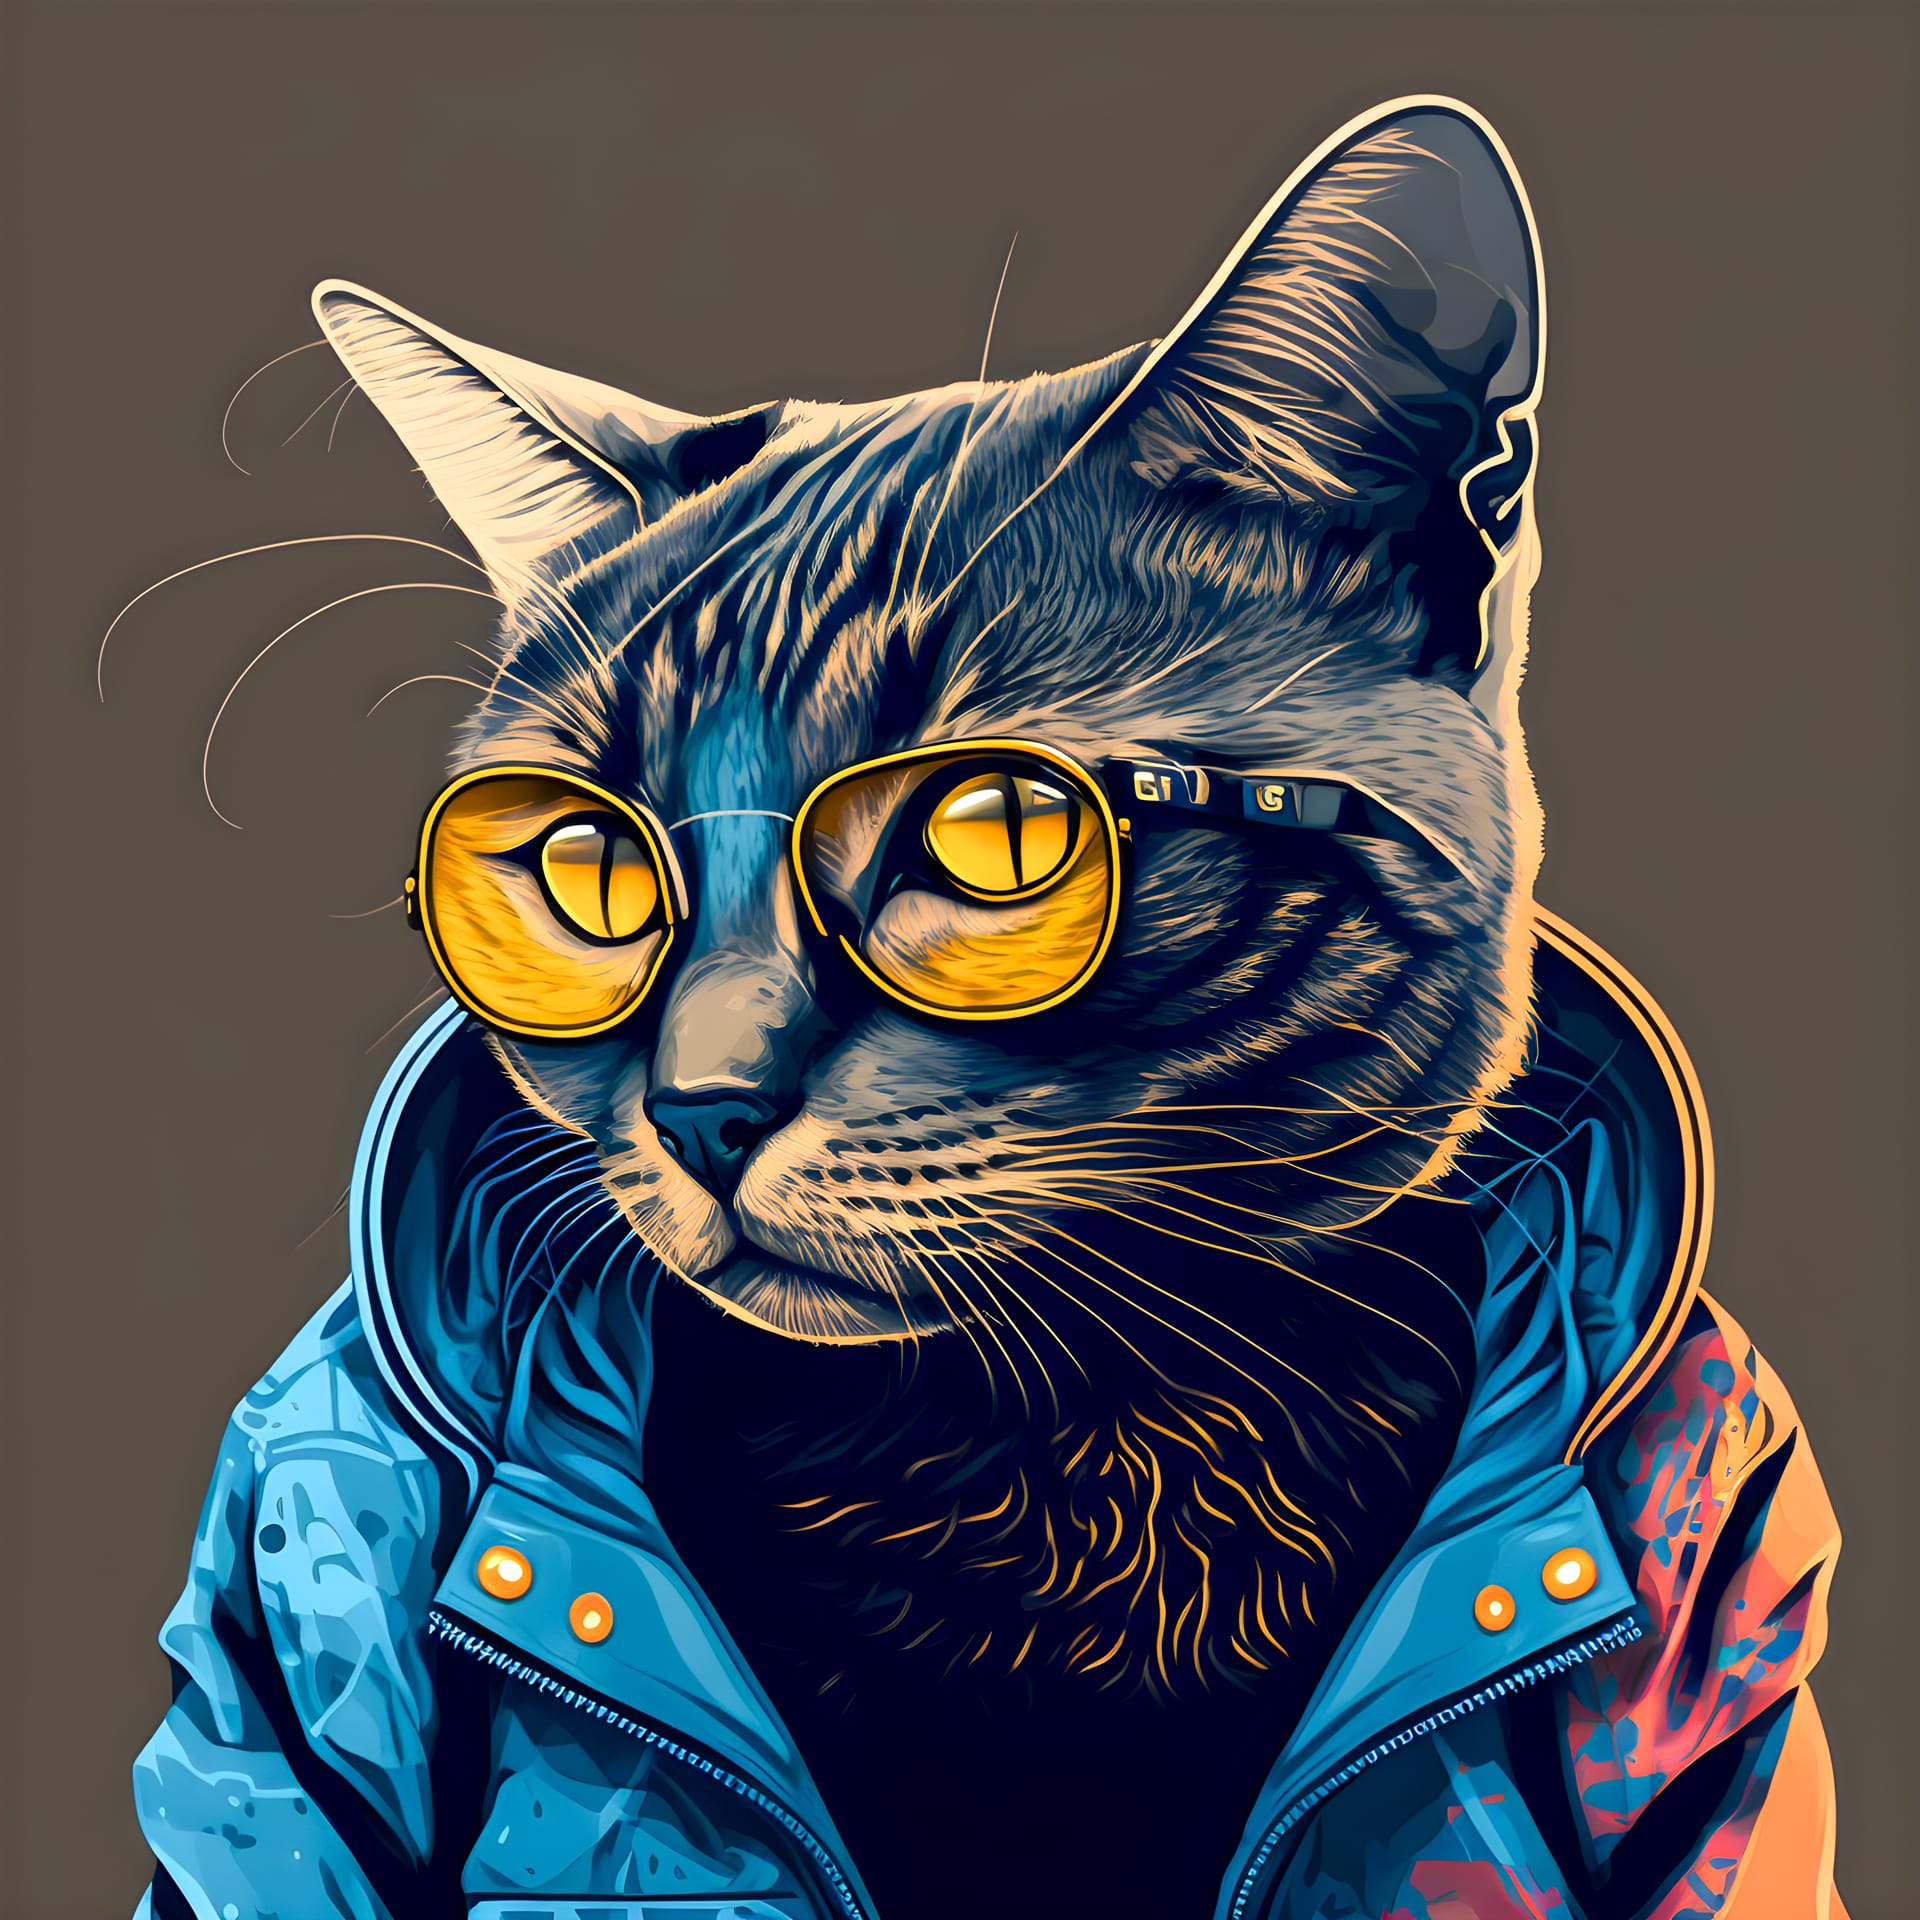 Hipster cute pop art cat illustration hand drawn realistic picture